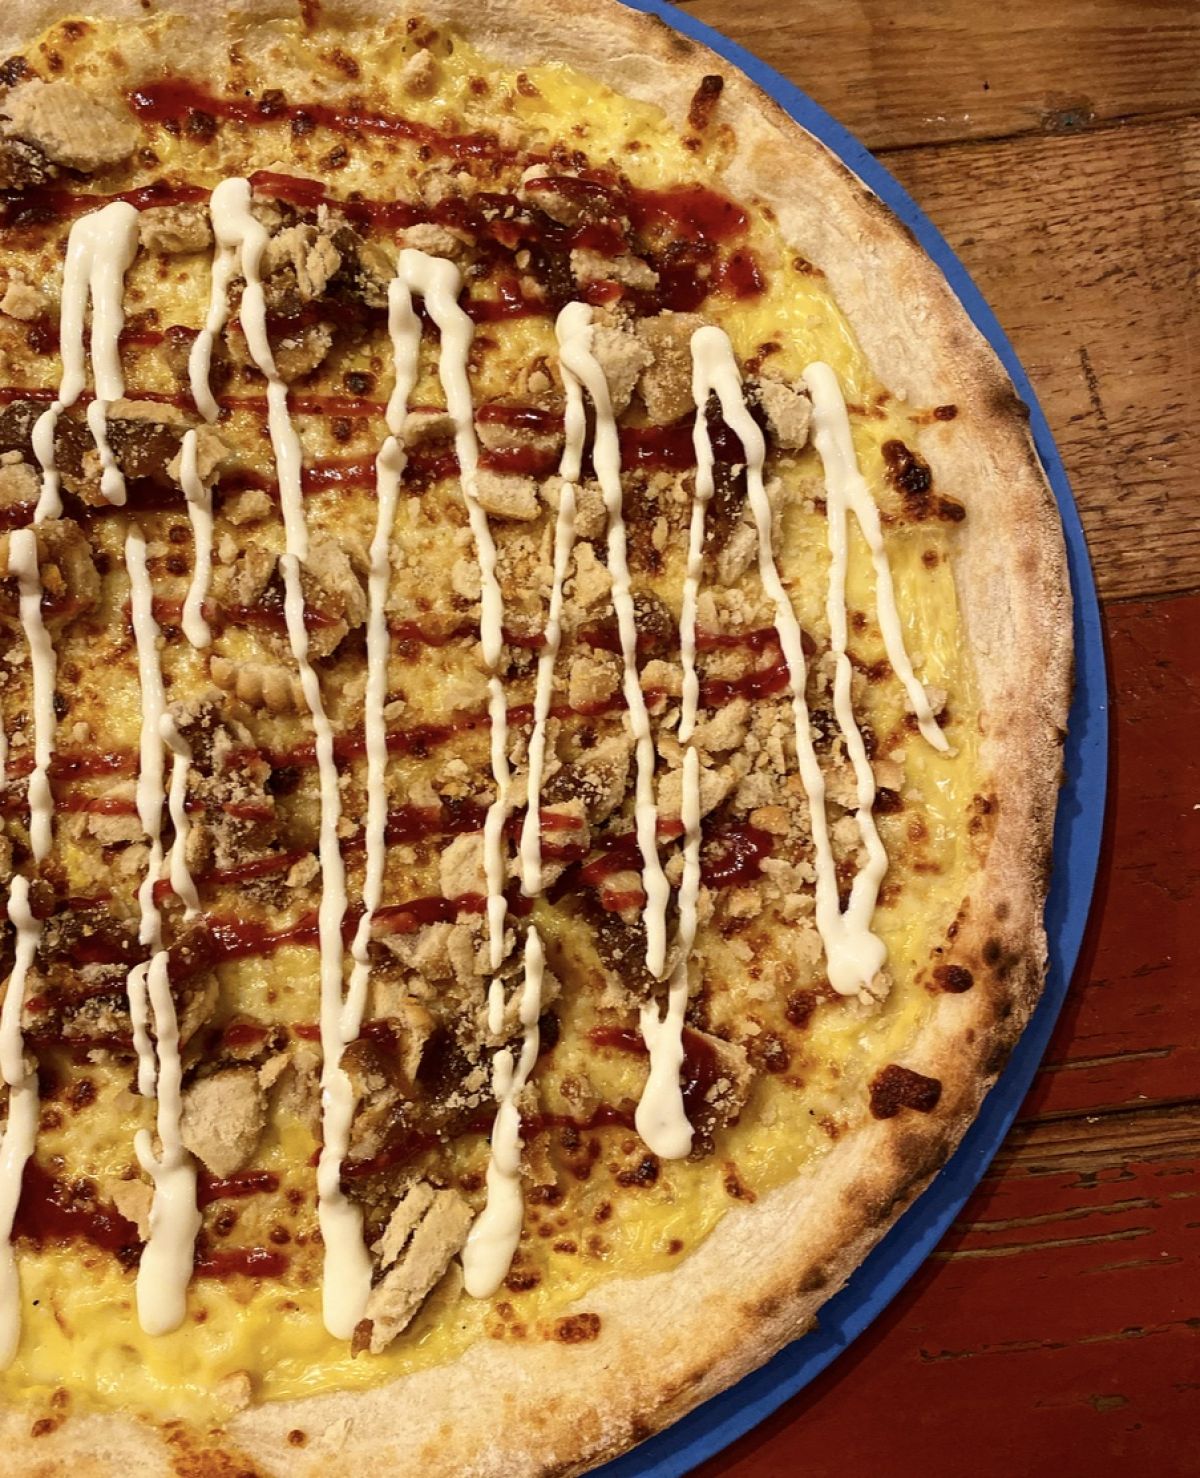 Crazy Pedro’s Christmas Pizza: Is it a step too far?